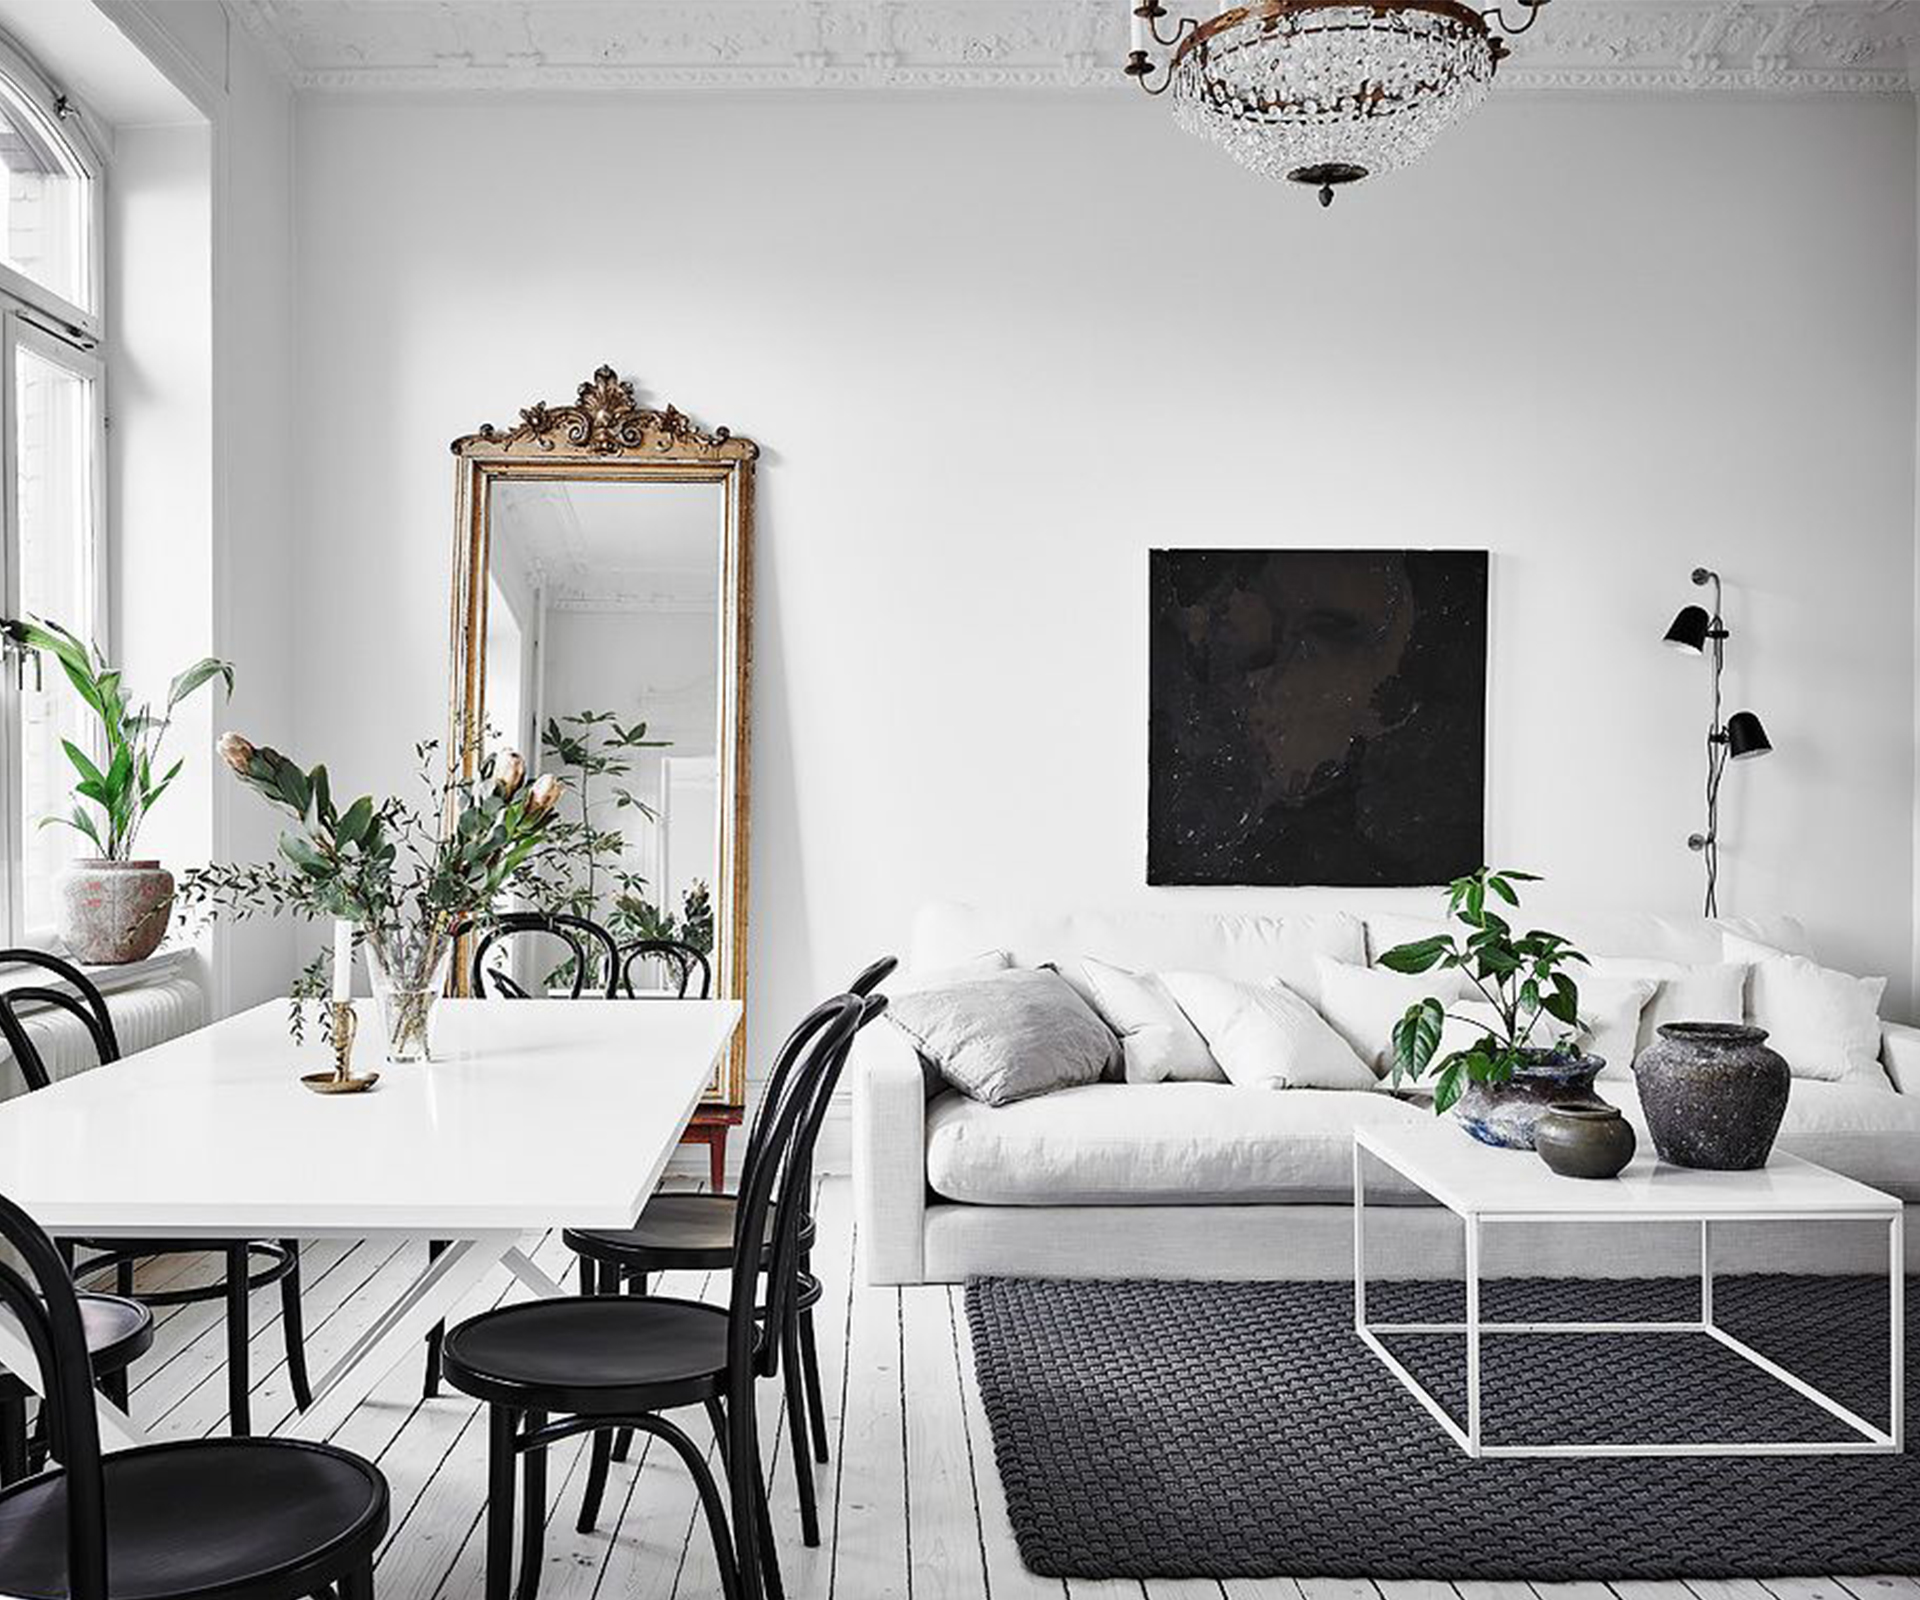 8 Instagram Accounts To Follow For The Ultimate Interior Inspiration